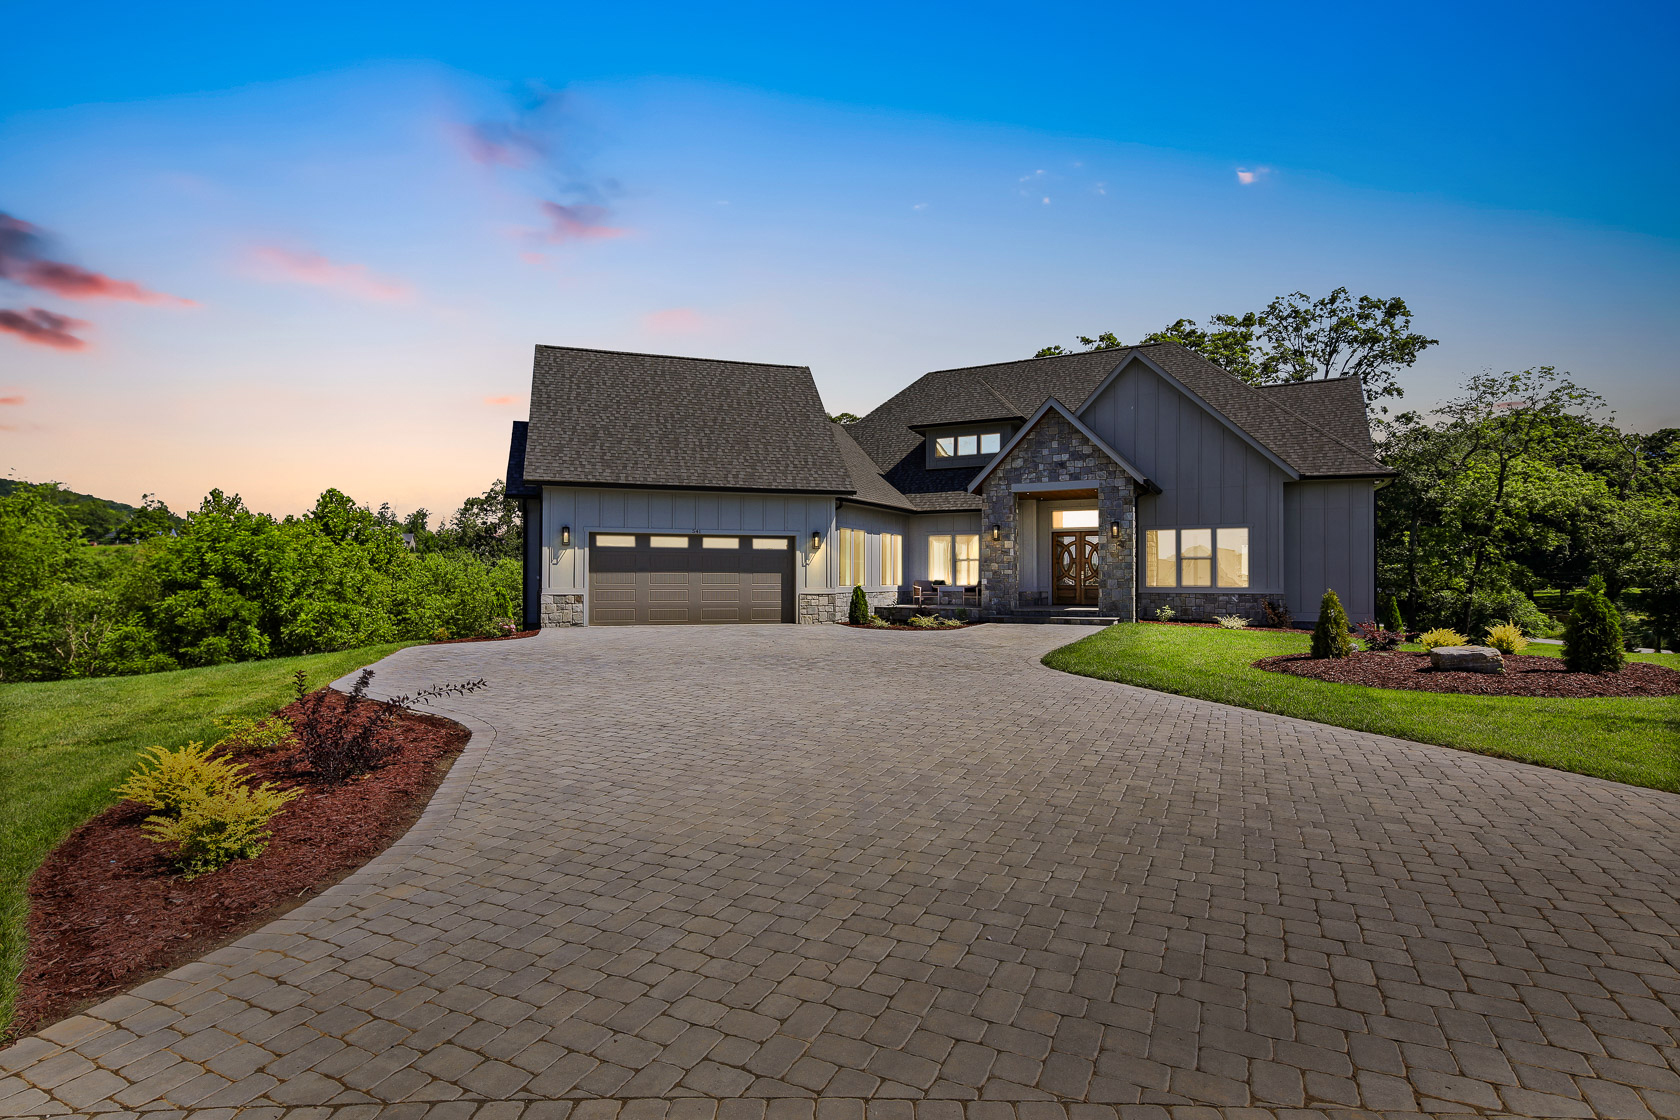 Luxury New Homes Await: Discover Mills River Crossing South with Big Hills Construction. Big Hills Construction Custom Home Builder in Asheville, North Carolina